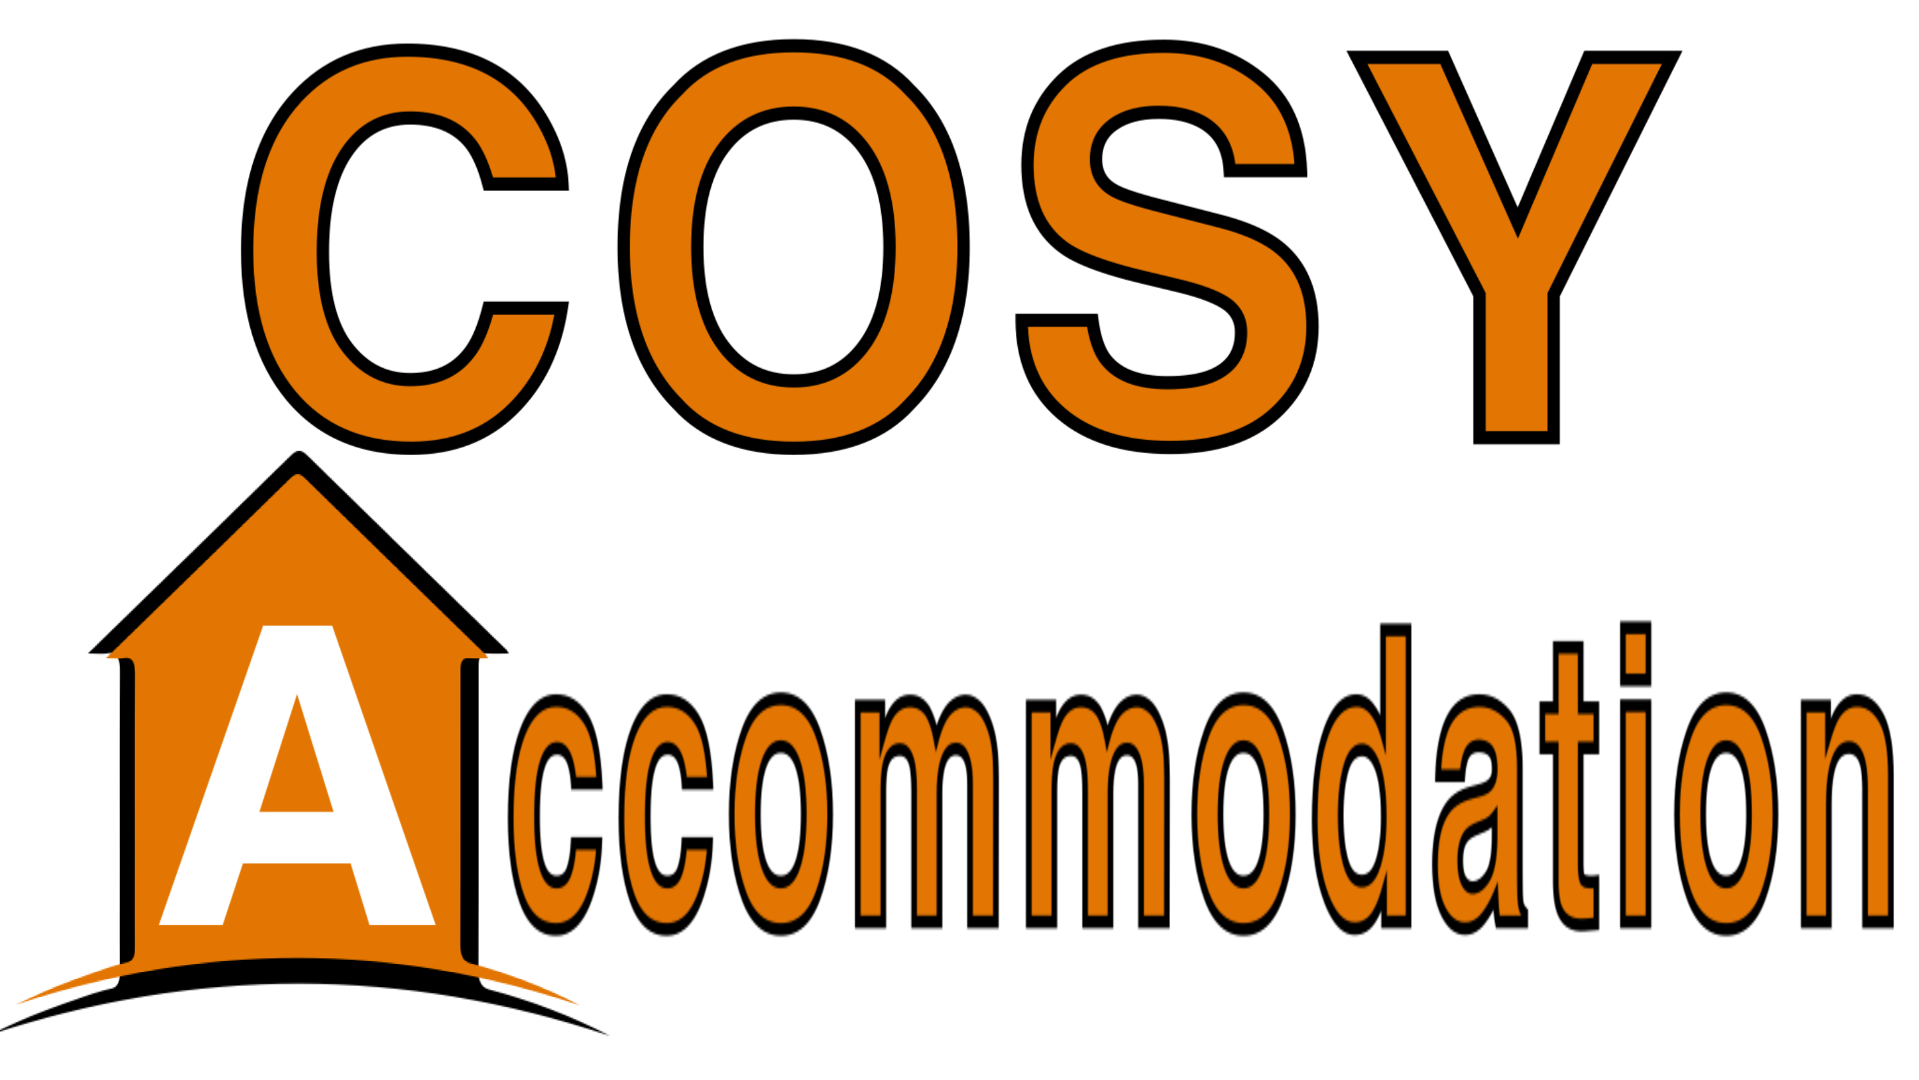 Contact Cosy Accommodation